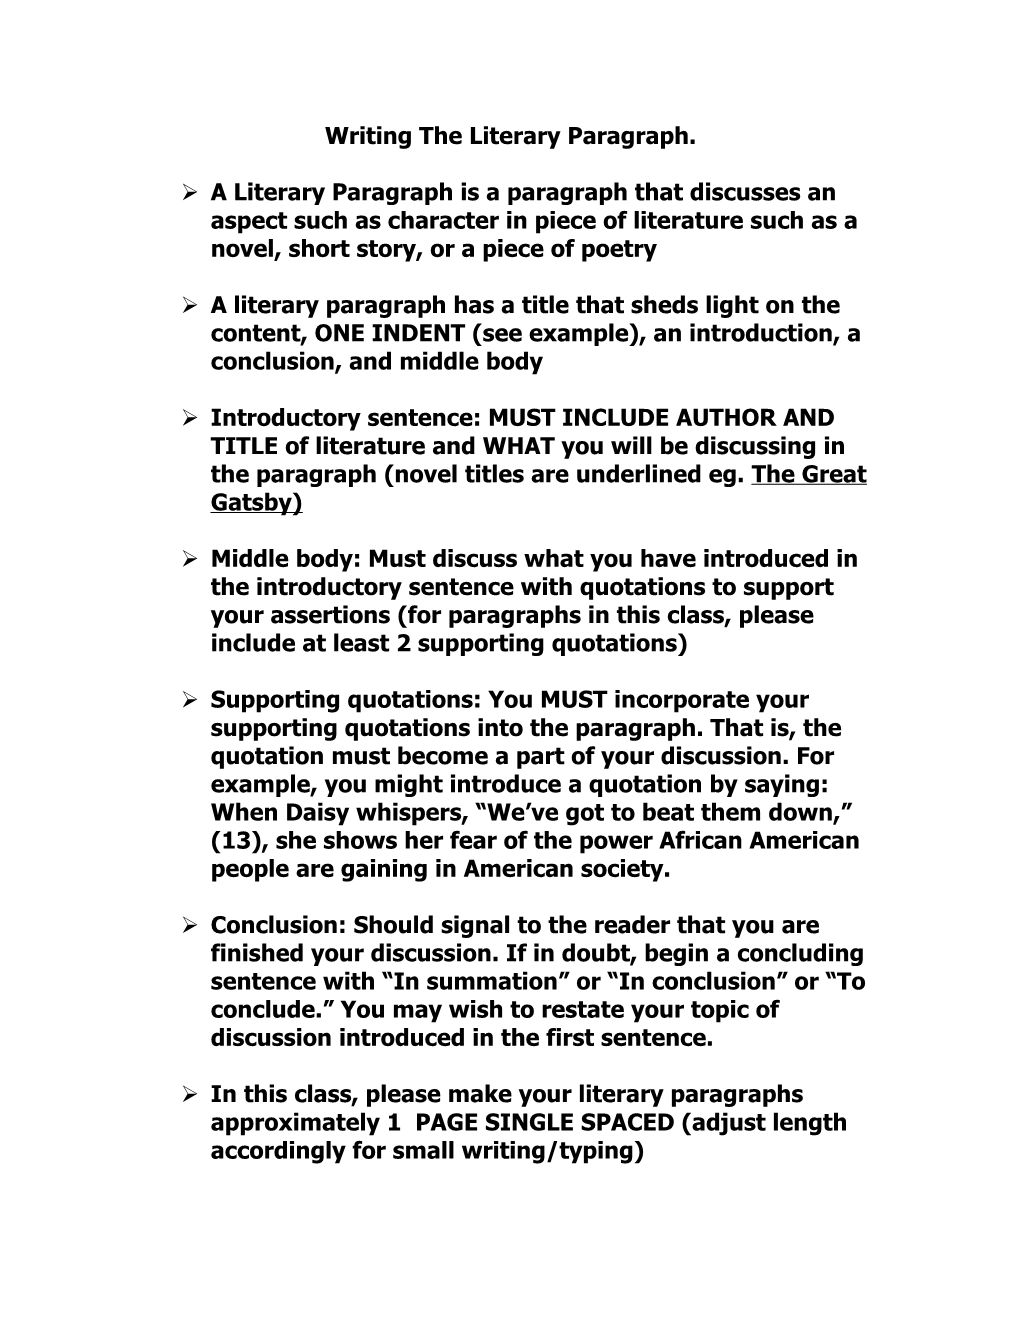 Writing the Literary Paragraph